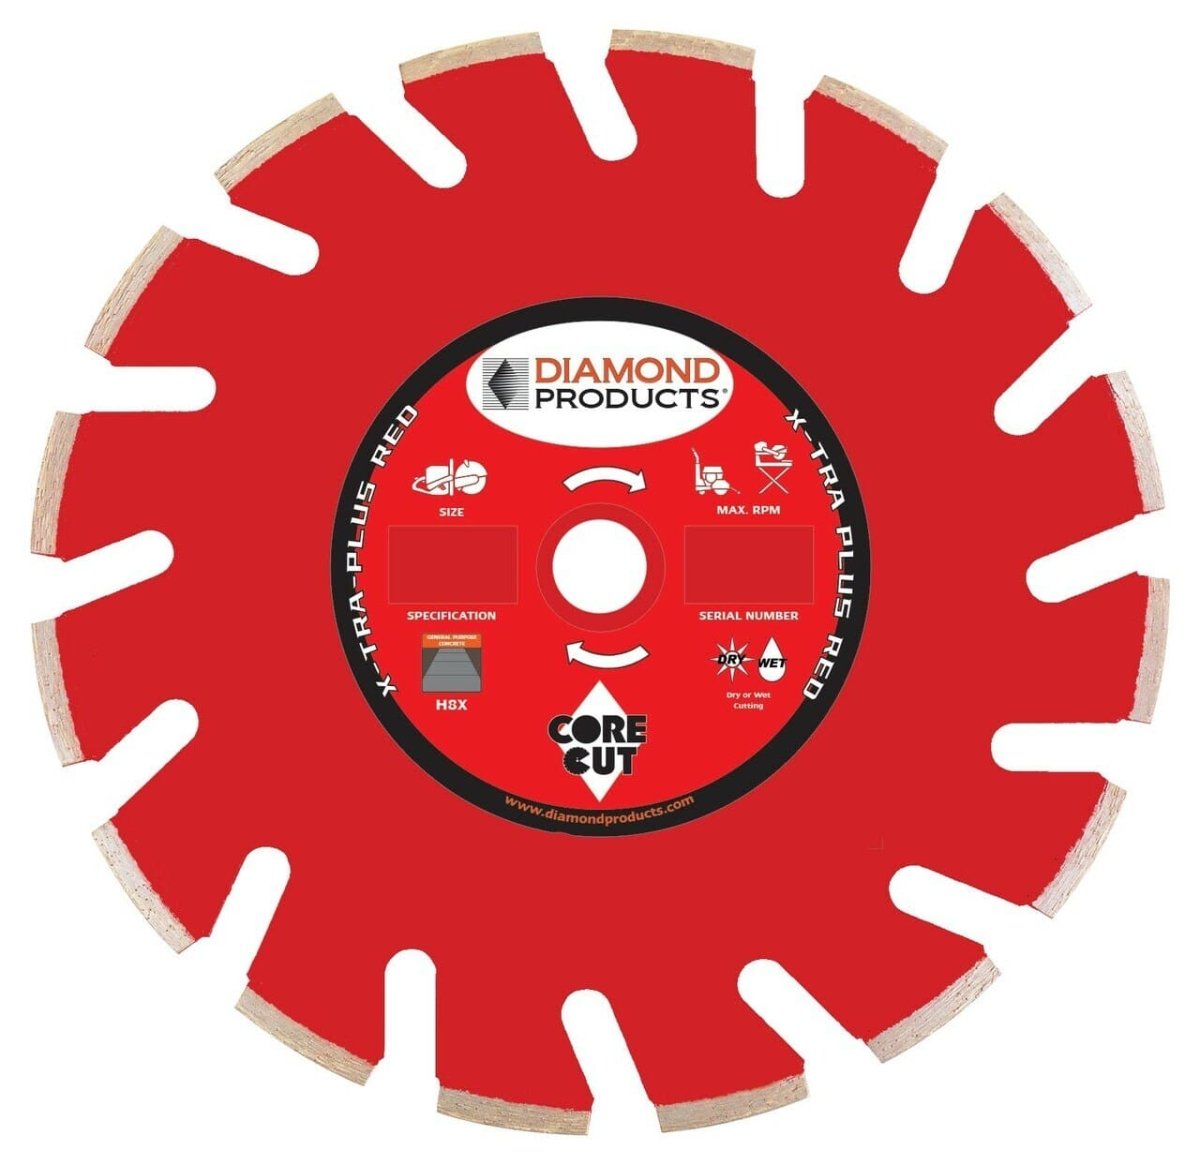 X-Tra Plus Red Ultimate for Reinforced Concrete - H7XU - Diamond Products